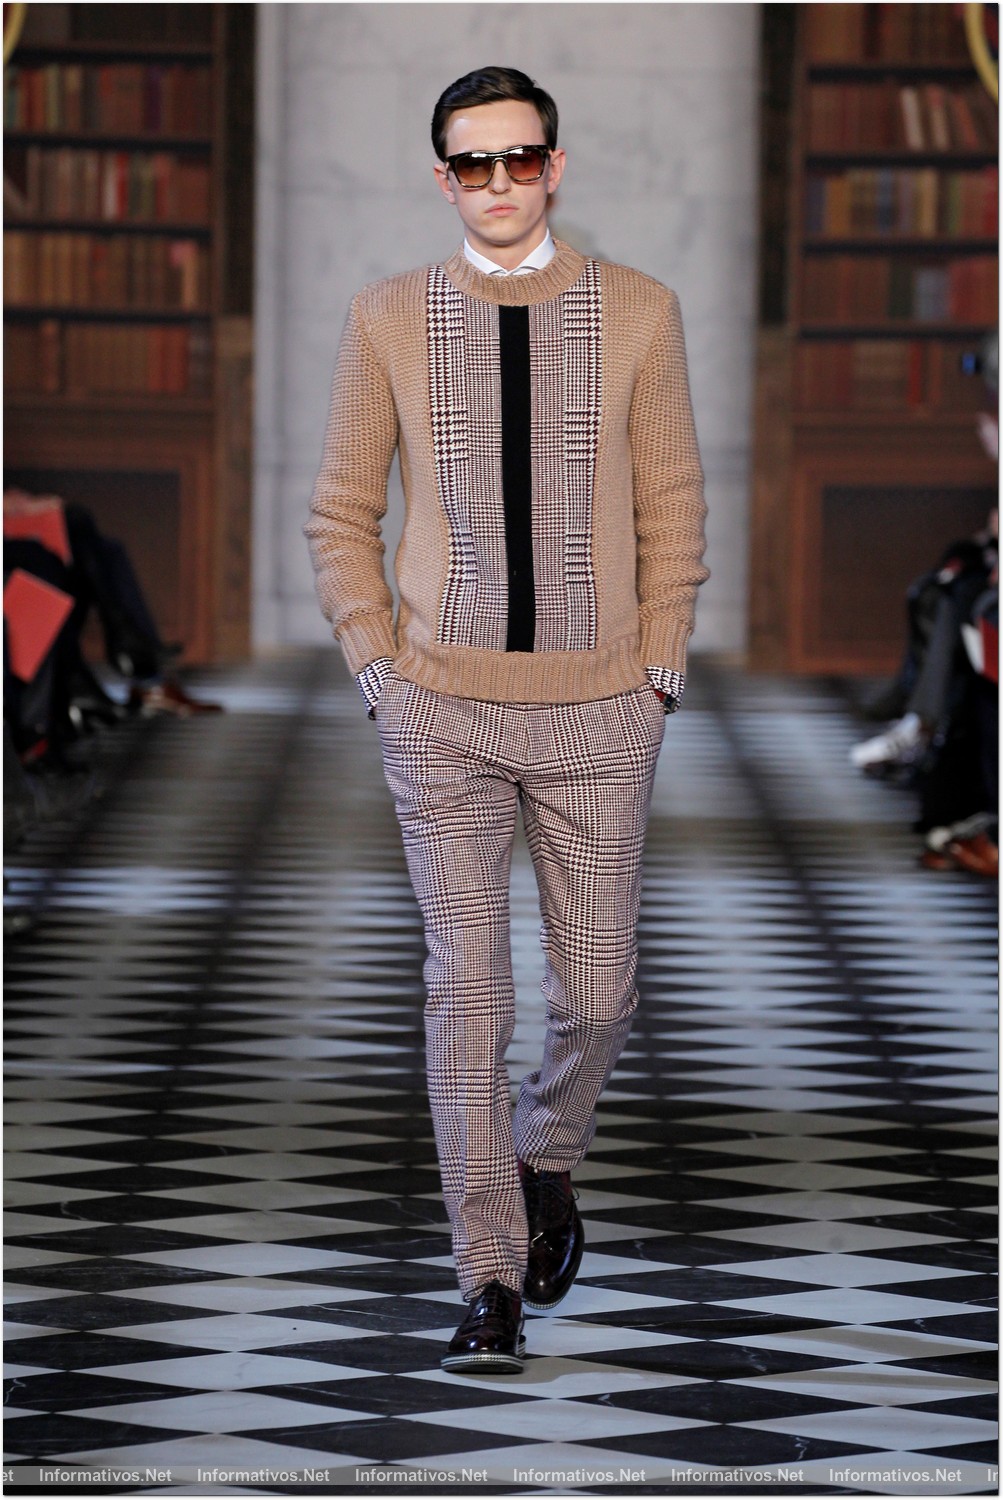 NY08FEB013.- Desfile Tommy Hilfiger Fall 2013 Men's Collection. 5. ALEX D